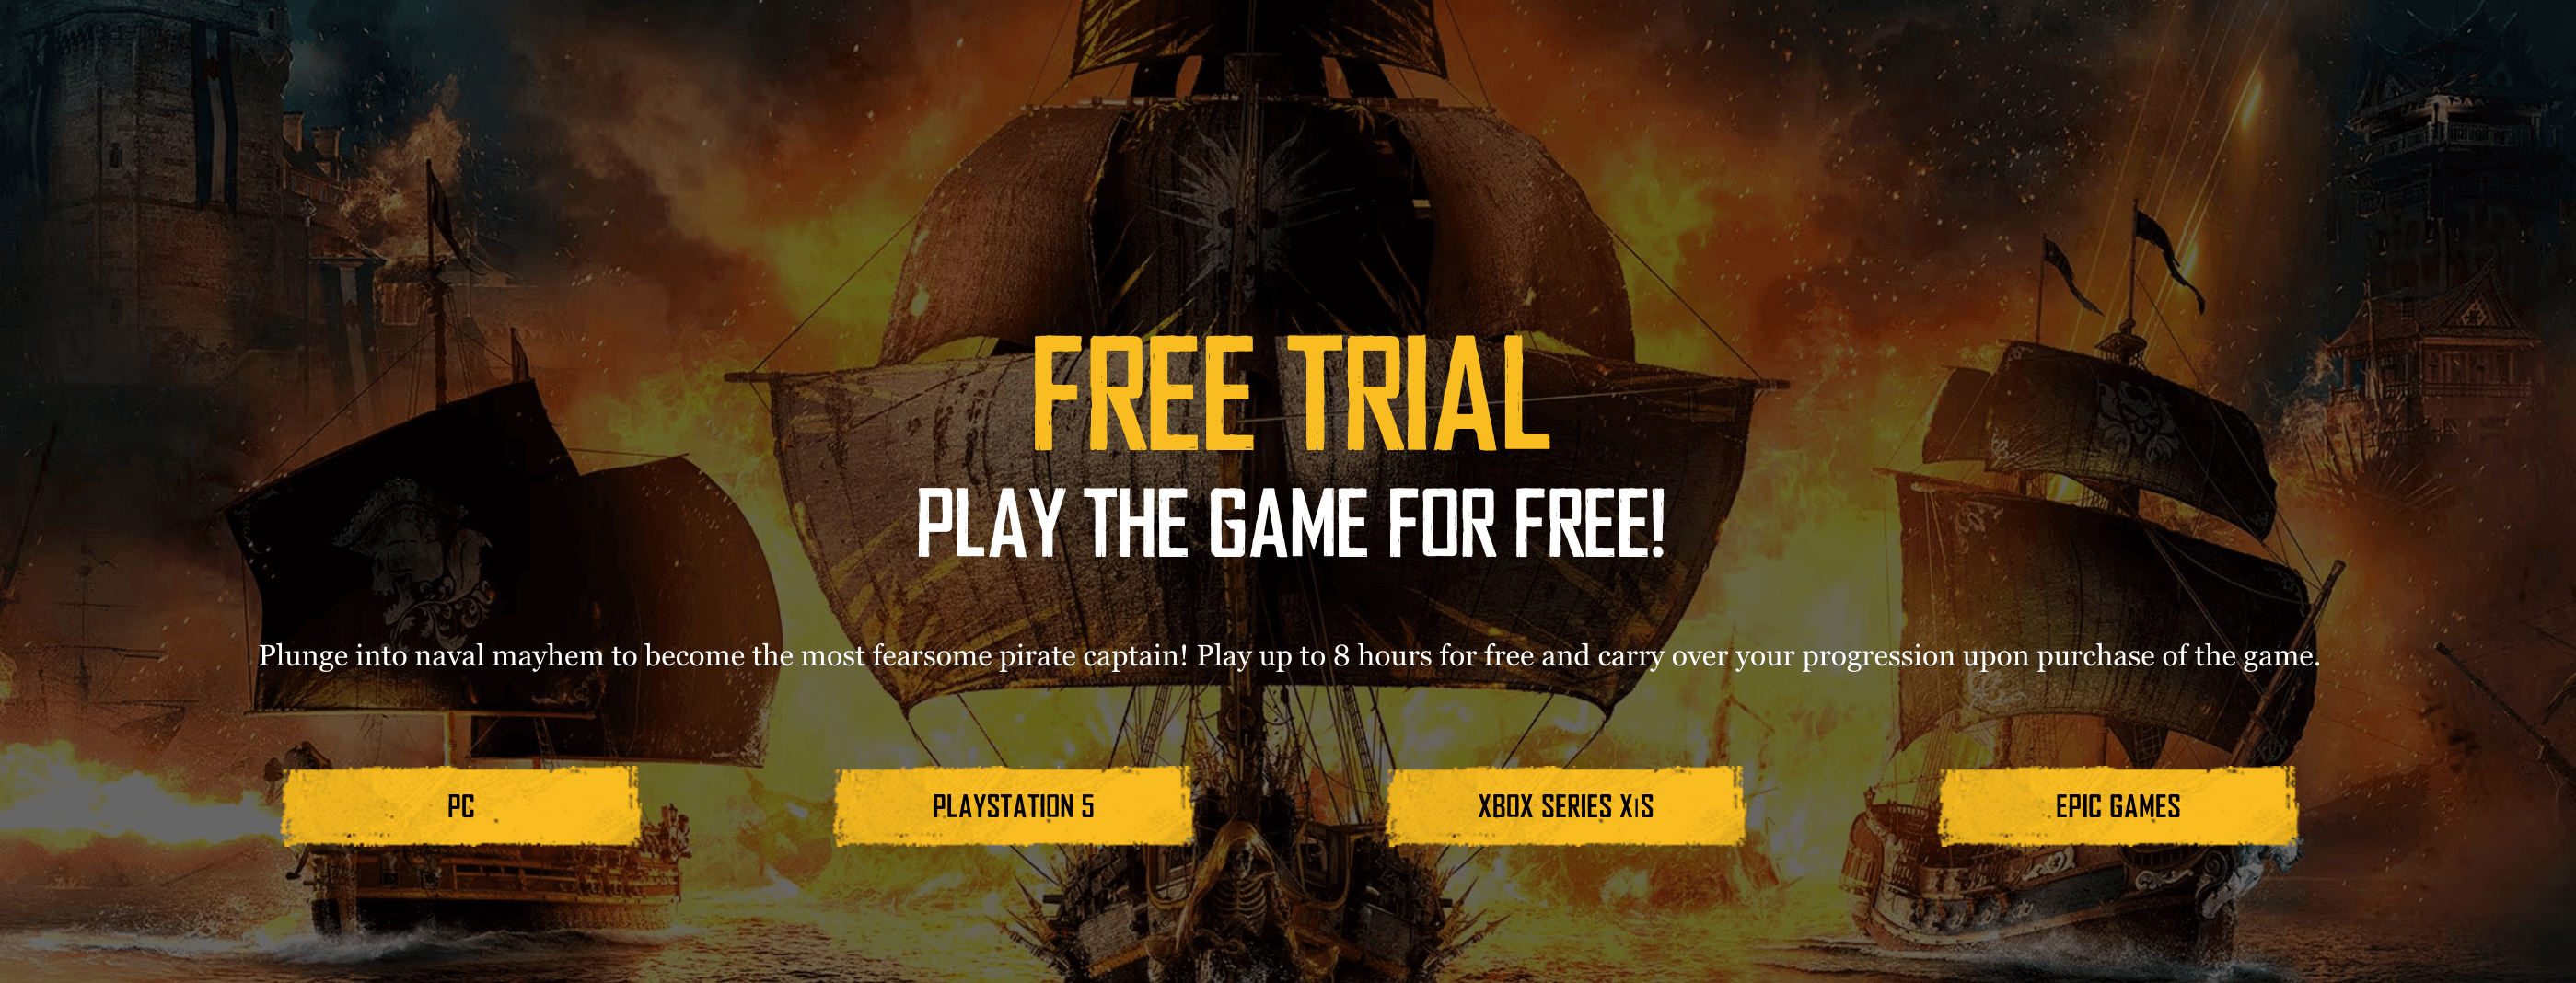 Criminal Archives: Play Skull and Bones For free